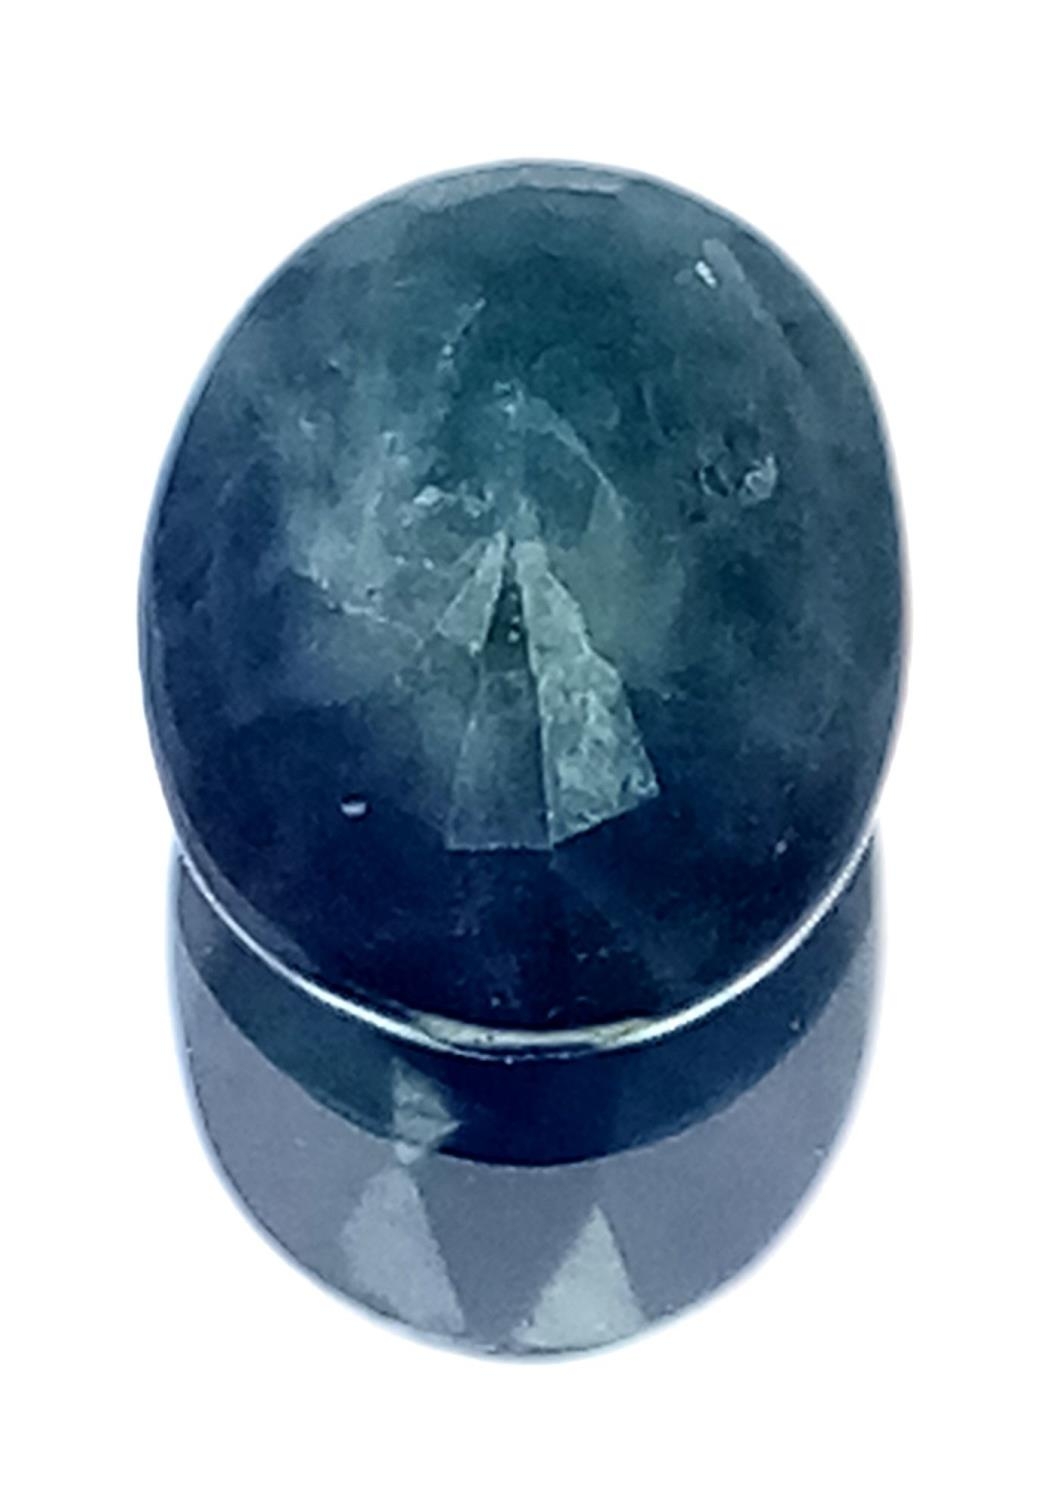 A 0.82ct Madagascan Blue Sapphire - GGI Certified. - Image 3 of 5